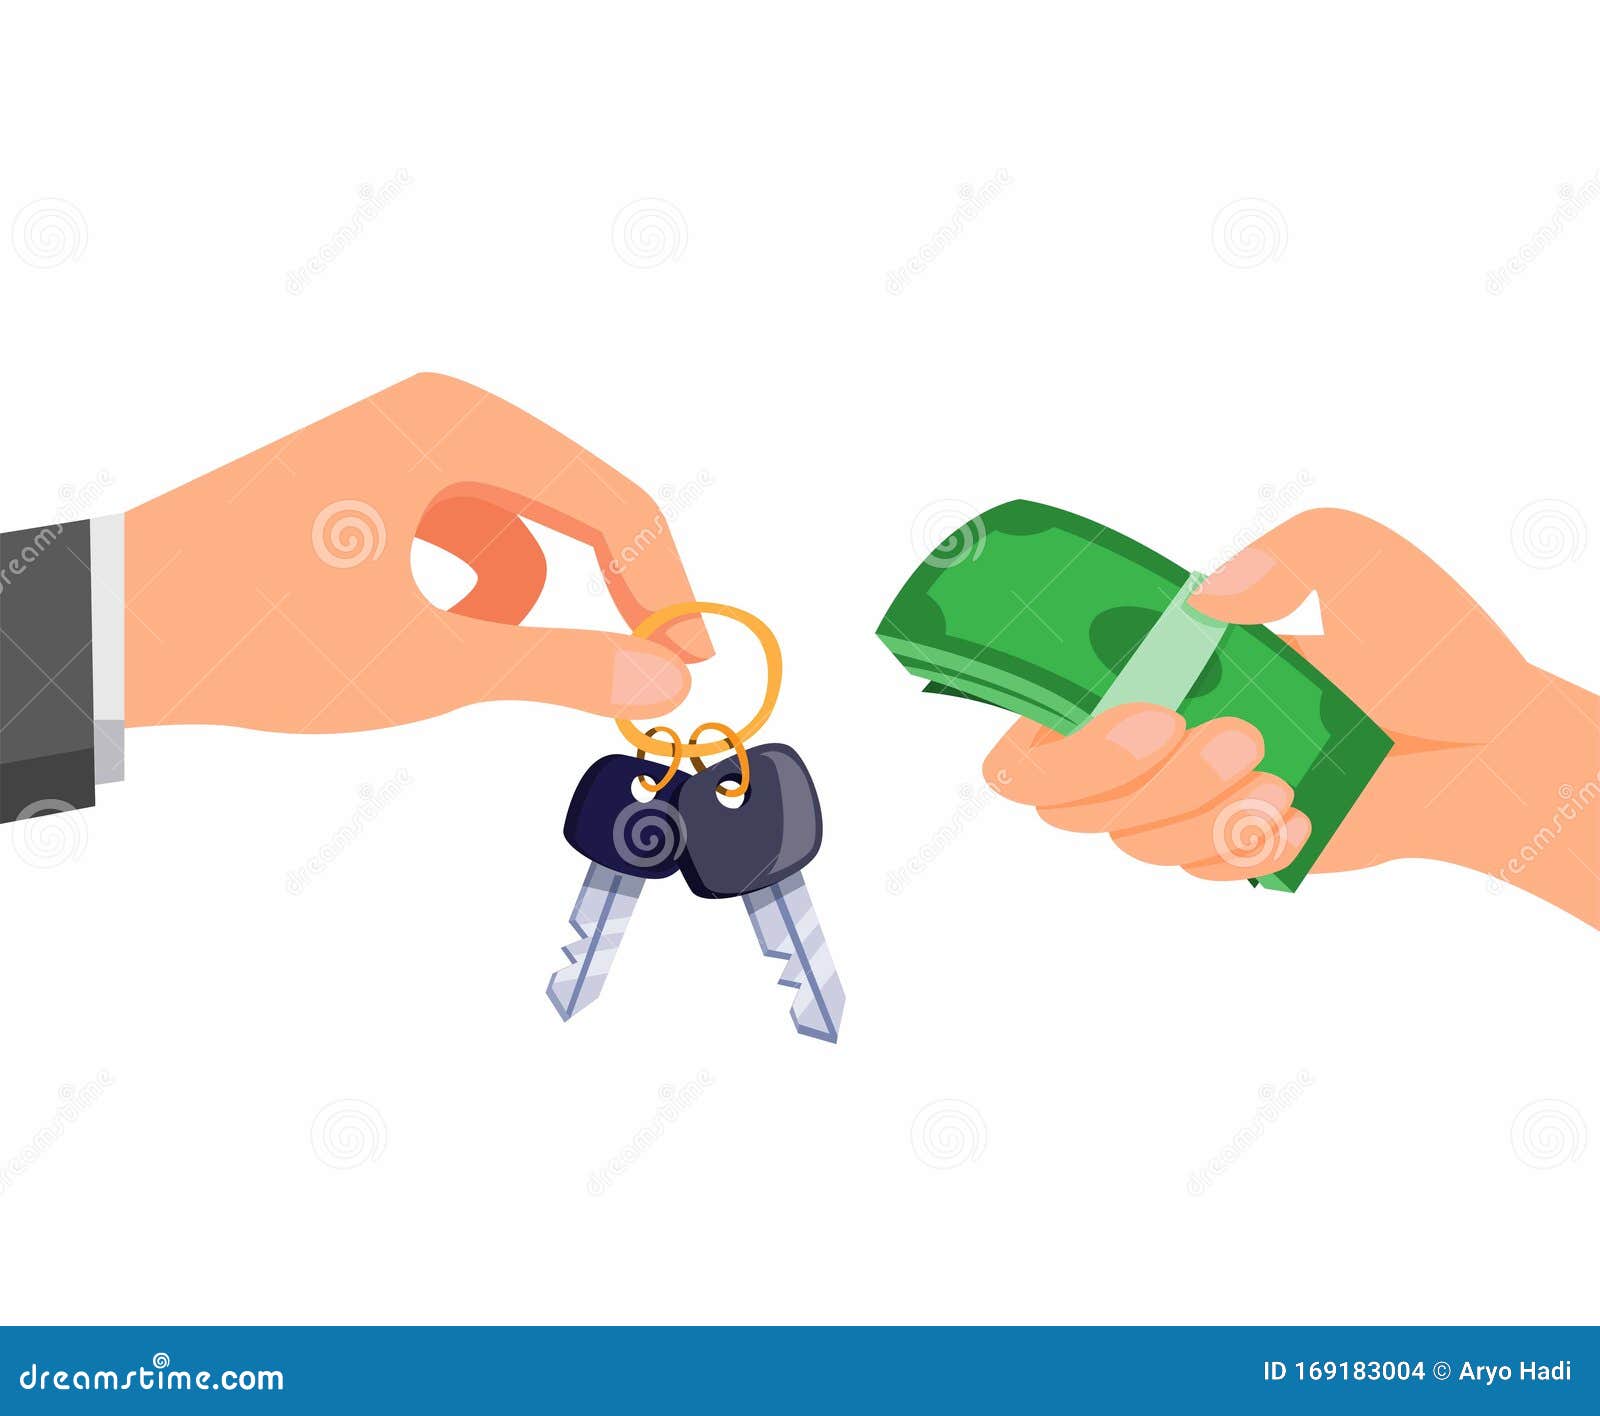 People Sell Buy Or Trade Human Hand Holding Key And Money Business Transaction Cartoon Flat